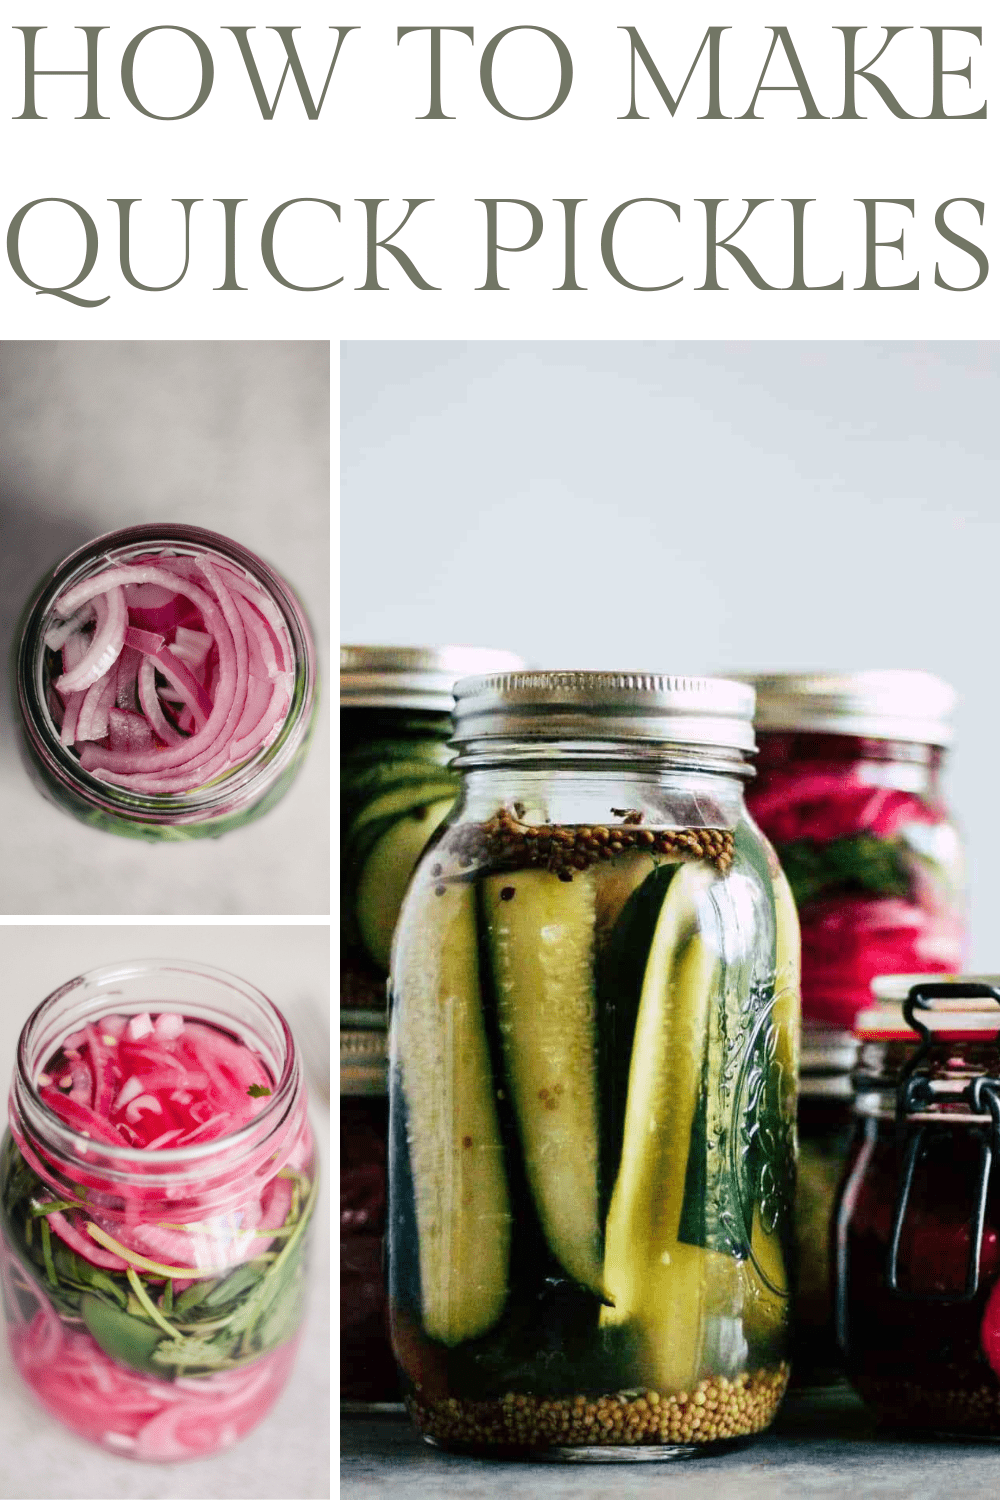 Collage of quick pickles with text reading, "How to Make Quick Pickles." Top image is overhead photo of raw onions in a jar. Bottom left image is the finished quick pickled red onion. Righthand image is of pickled cucumbers, radishes, and onions in jars.